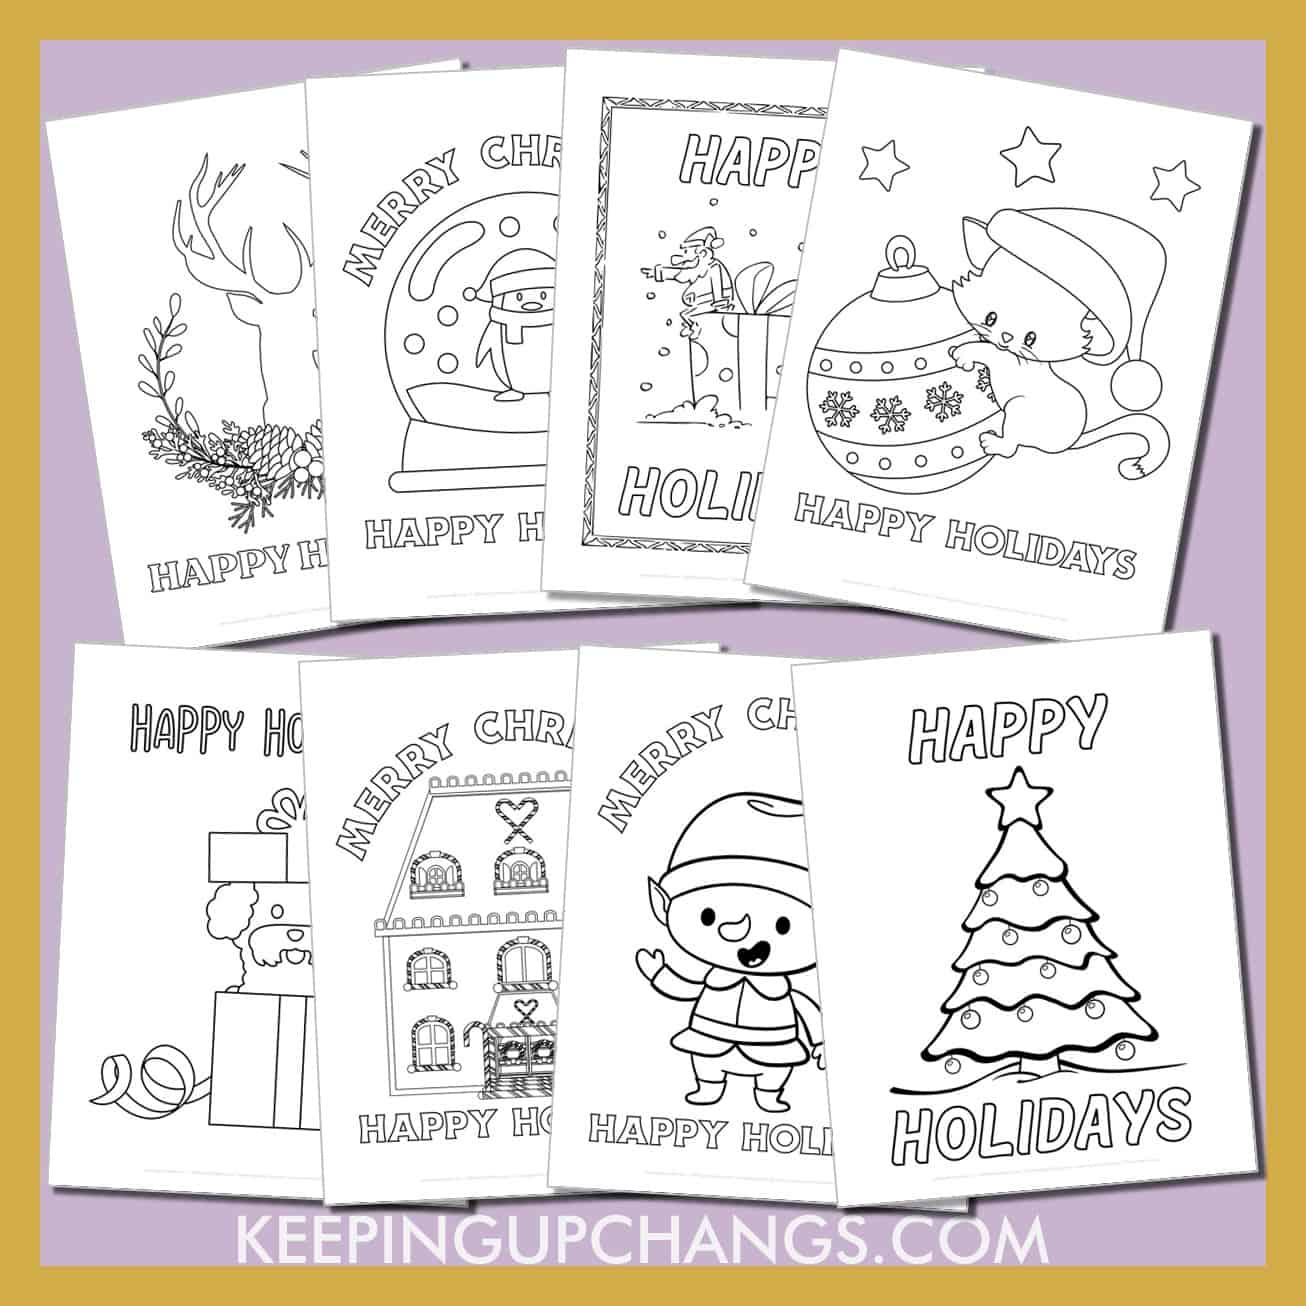 free happy holidays colouring sheets including cute, easy, simple and detailed winter christmas designs.